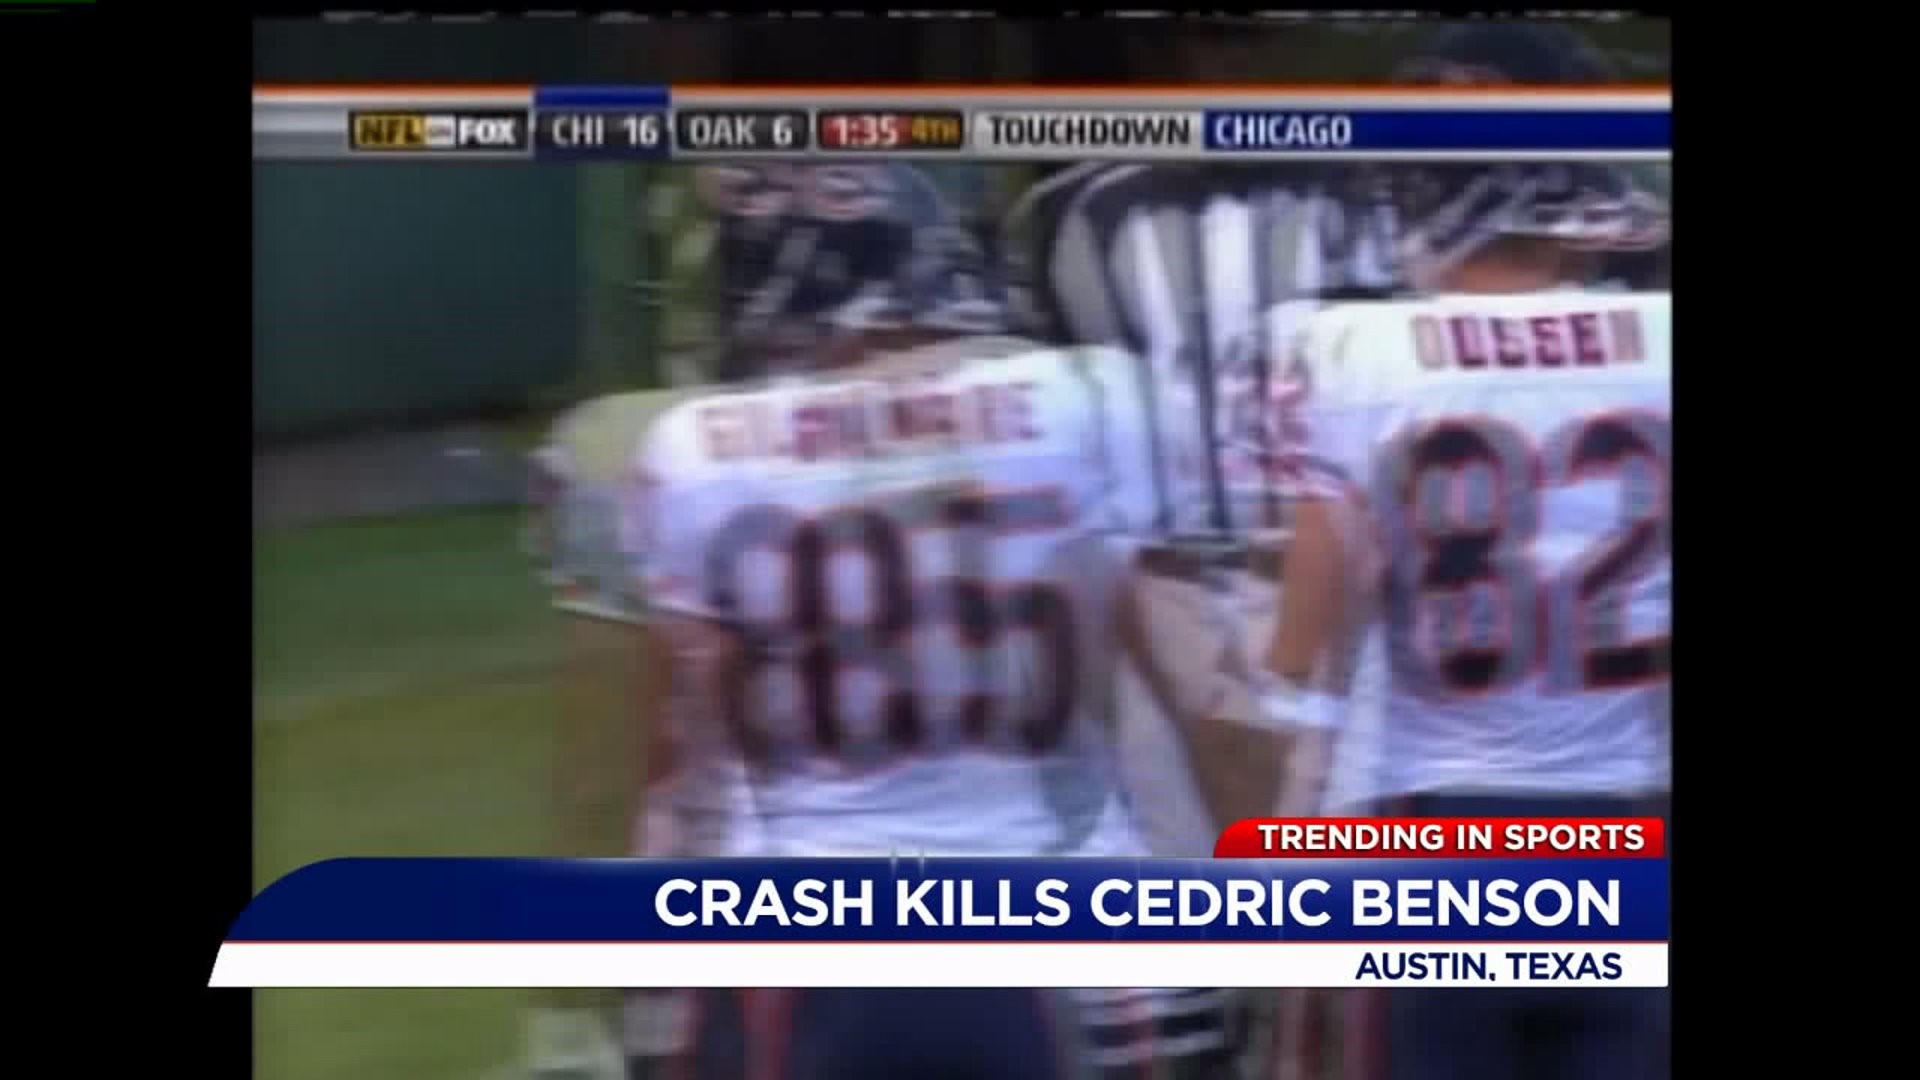 Former NFL player and Texas Longhorns star Cedric Benson dies in a motorcycle crash